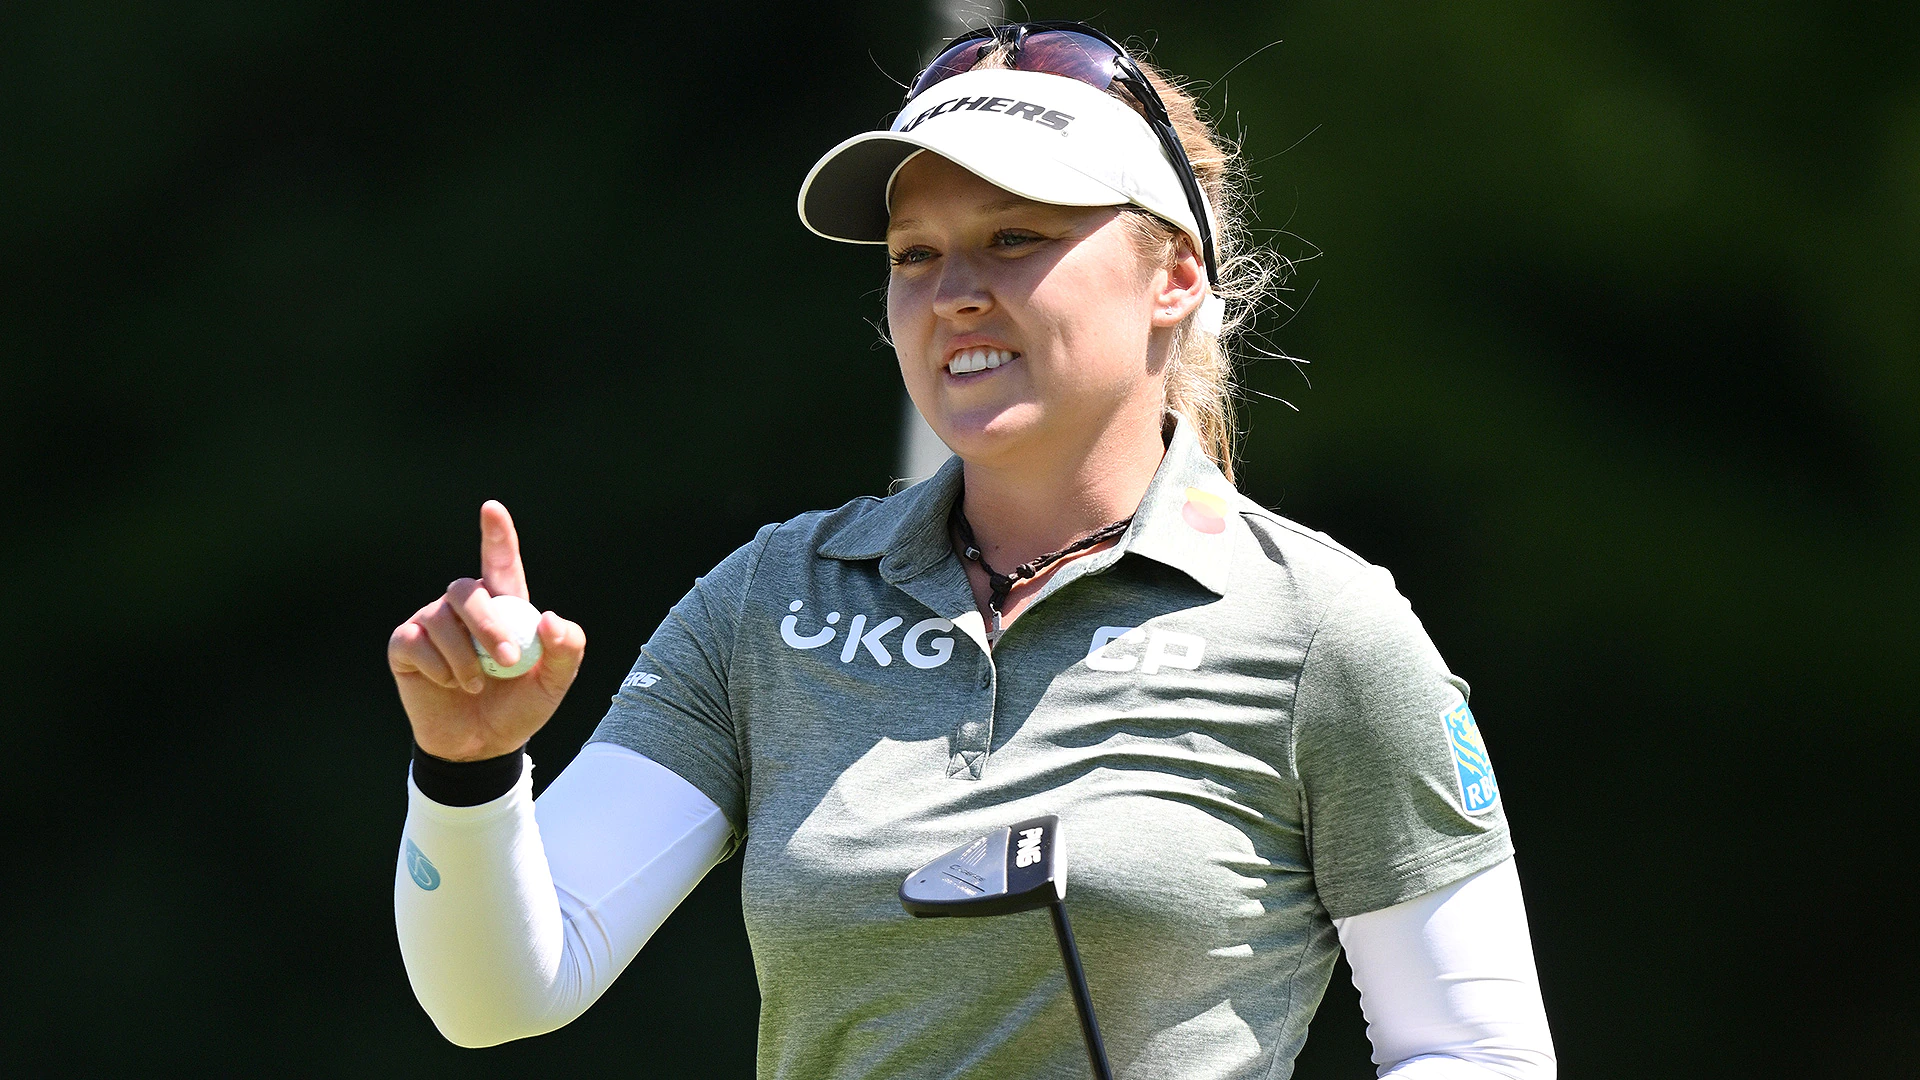 Brooke Henderson steers new putting grip to lead at 2022 Amundi Evian Championship